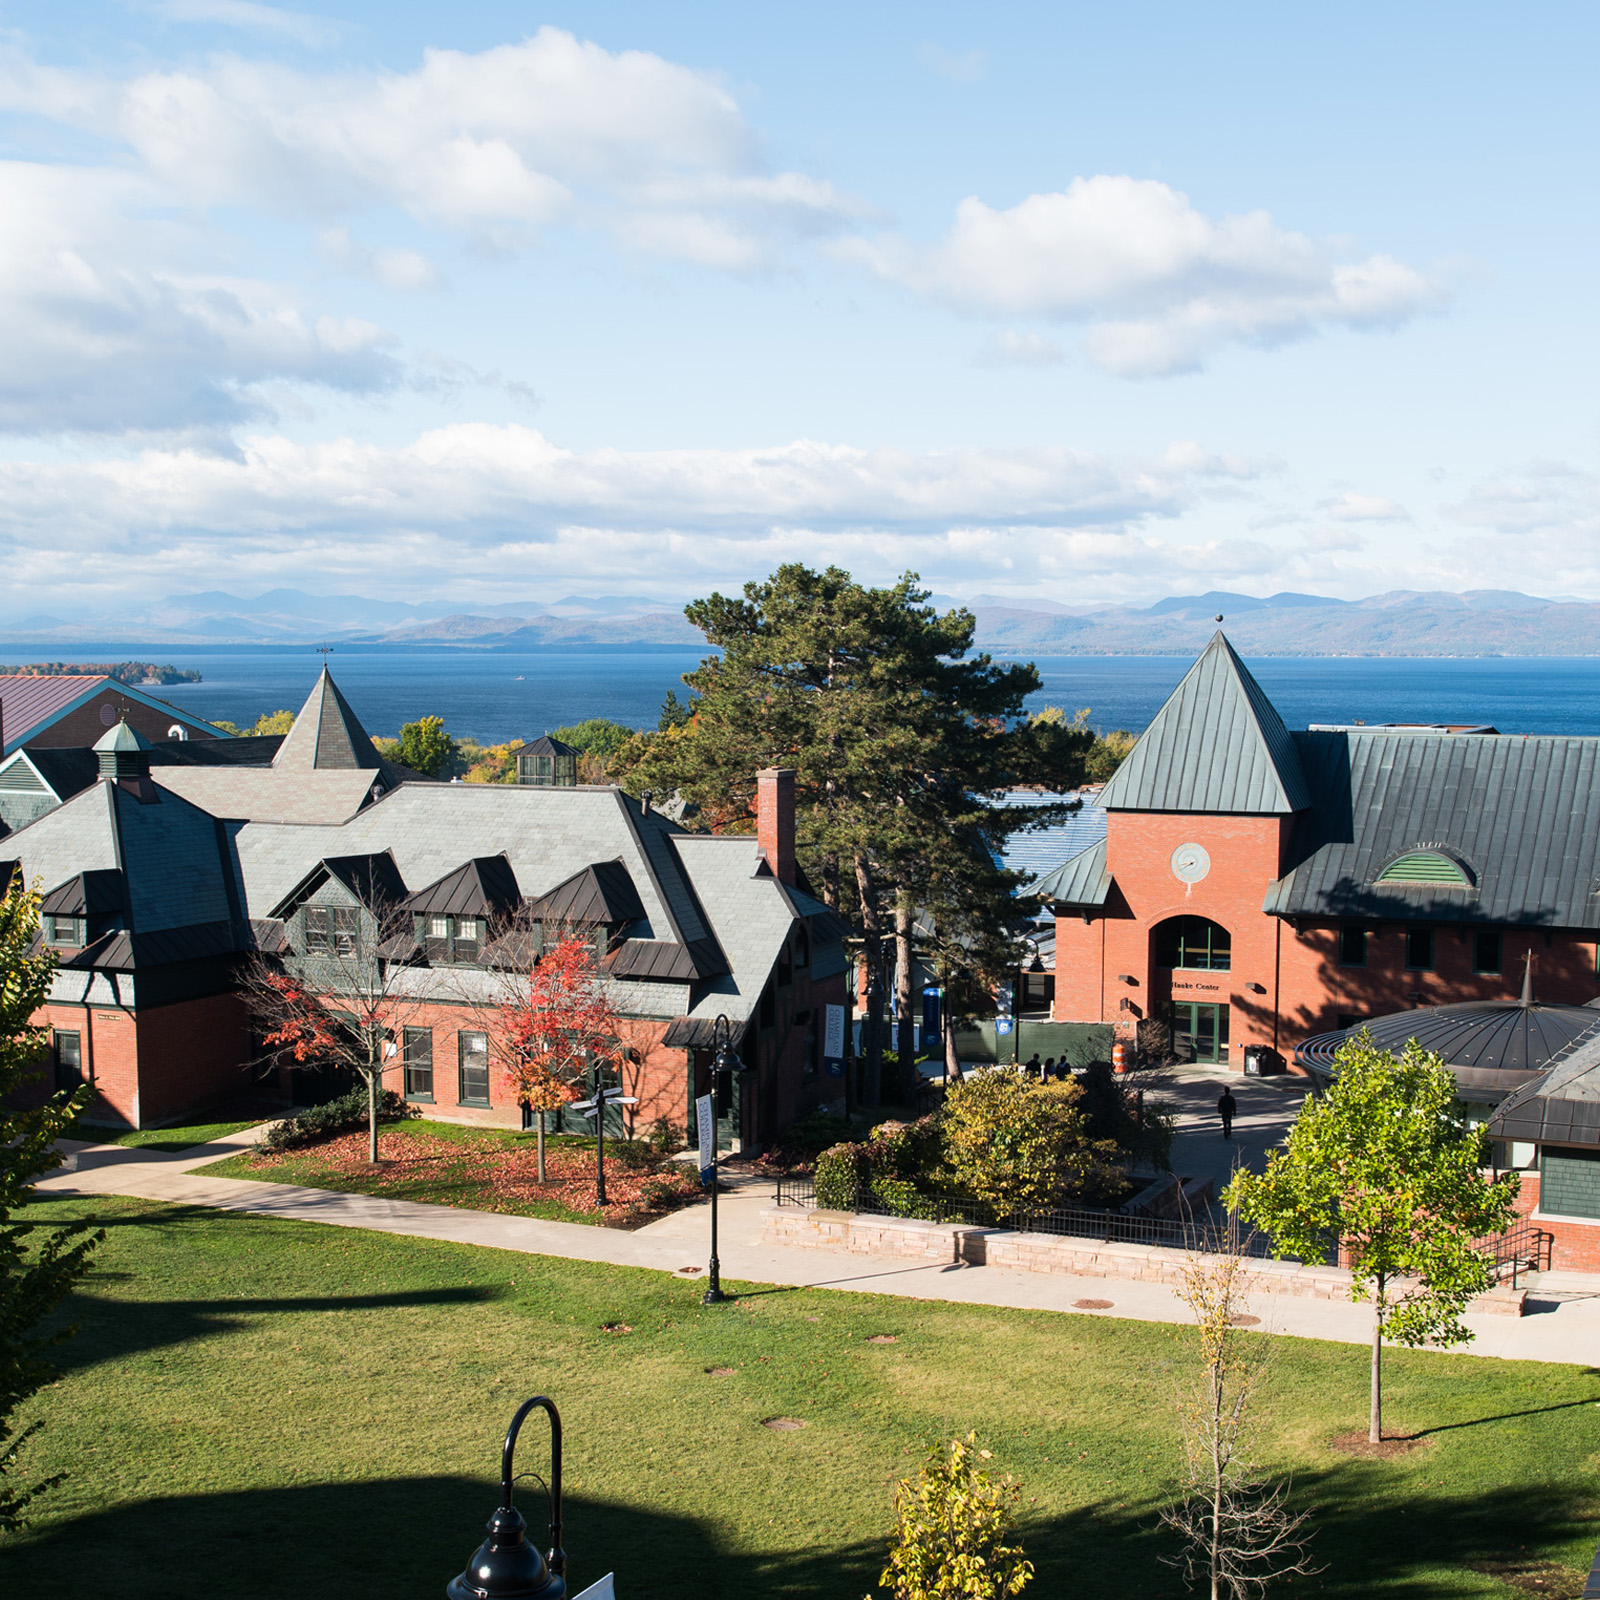 Champlain school buildings with the lake and mountains in the background